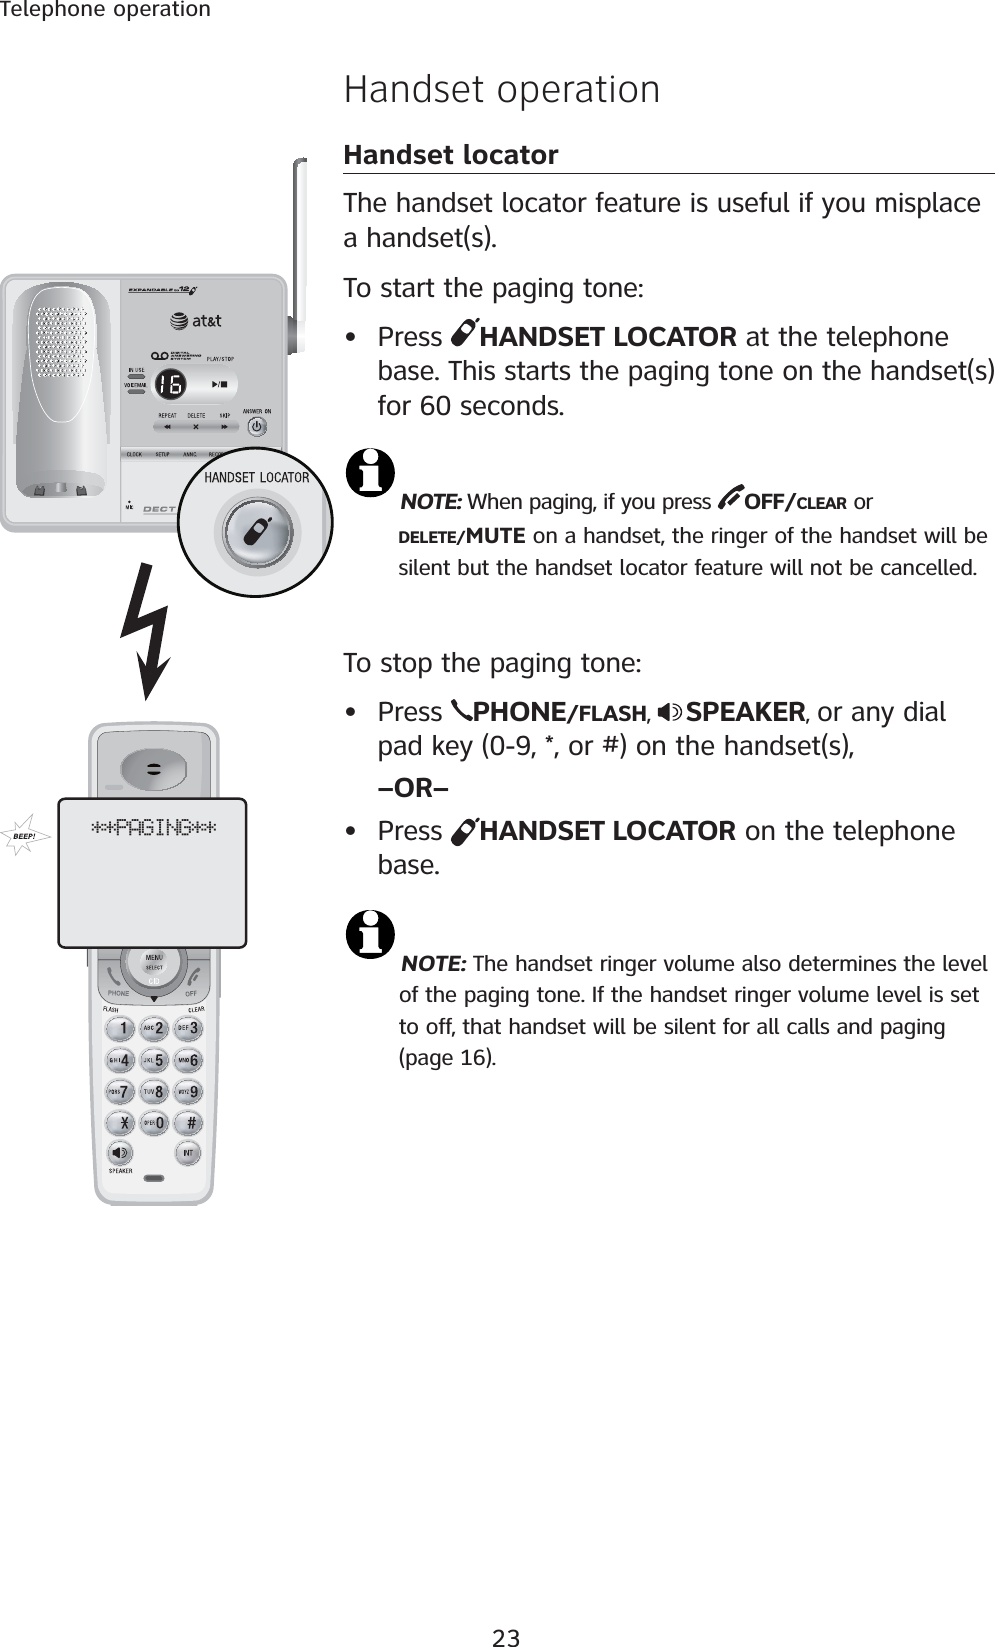 23Telephone operationHandset operationHandset locatorThe handset locator feature is useful if you misplace a handset(s). To start the paging tone: • Press  HANDSET LOCATOR at the telephone base. This starts the paging tone on the handset(s) for 60 seconds. NOTE: When paging, if you press  OFF/CLEAR or    DELETE/MUTE on a handset, the ringer of the handset will be    silent but the handset locator feature will not be cancelled.To stop the paging tone:• Press  PHONE/FLASH,  SPEAKER, or any dial pad key (0-9, *, or #) on the handset(s), –OR–• Press  HANDSET LOCATOR on the telephone base.NOTE: The handset ringer volume also determines the level         of the paging tone. If the handset ringer volume level is set         to off, that handset will be silent for all calls and paging                  (page 16).**PAGING**